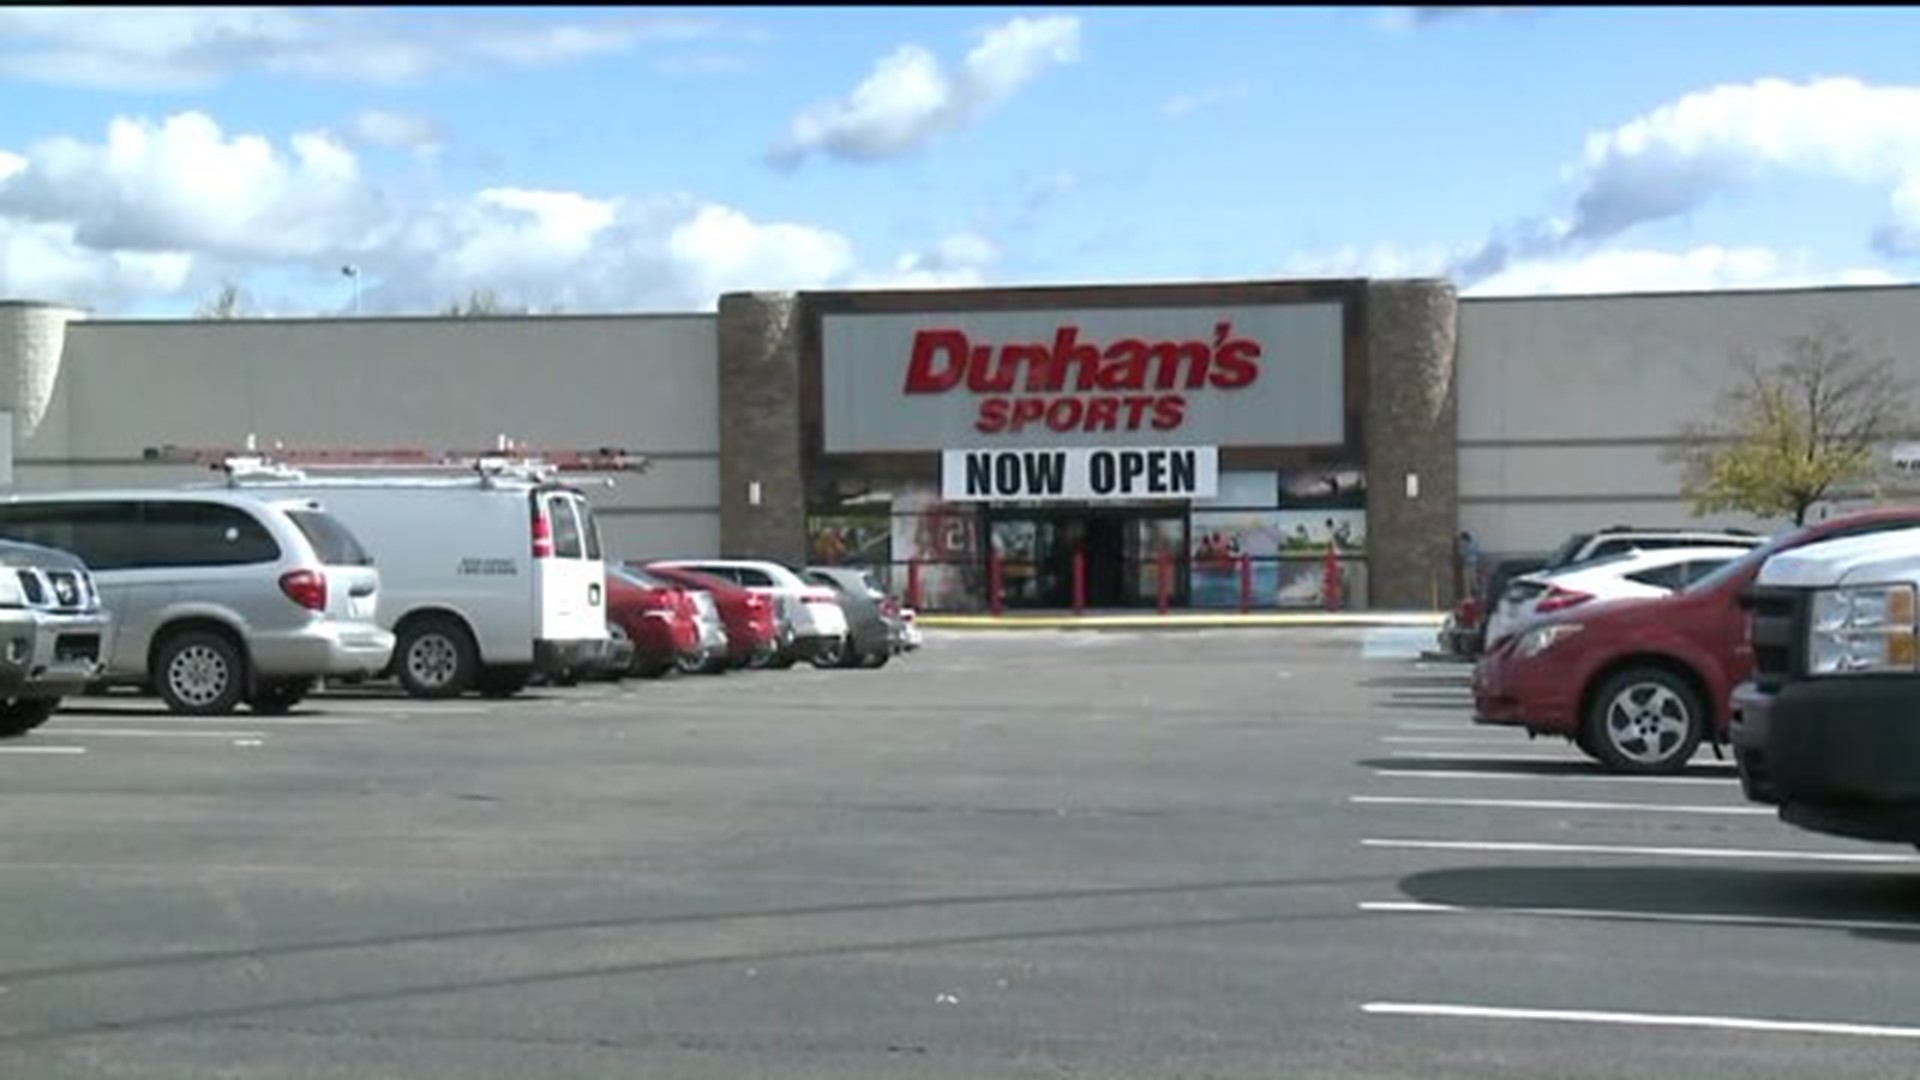 Dunham's Sports Now Open at Laurel Mall